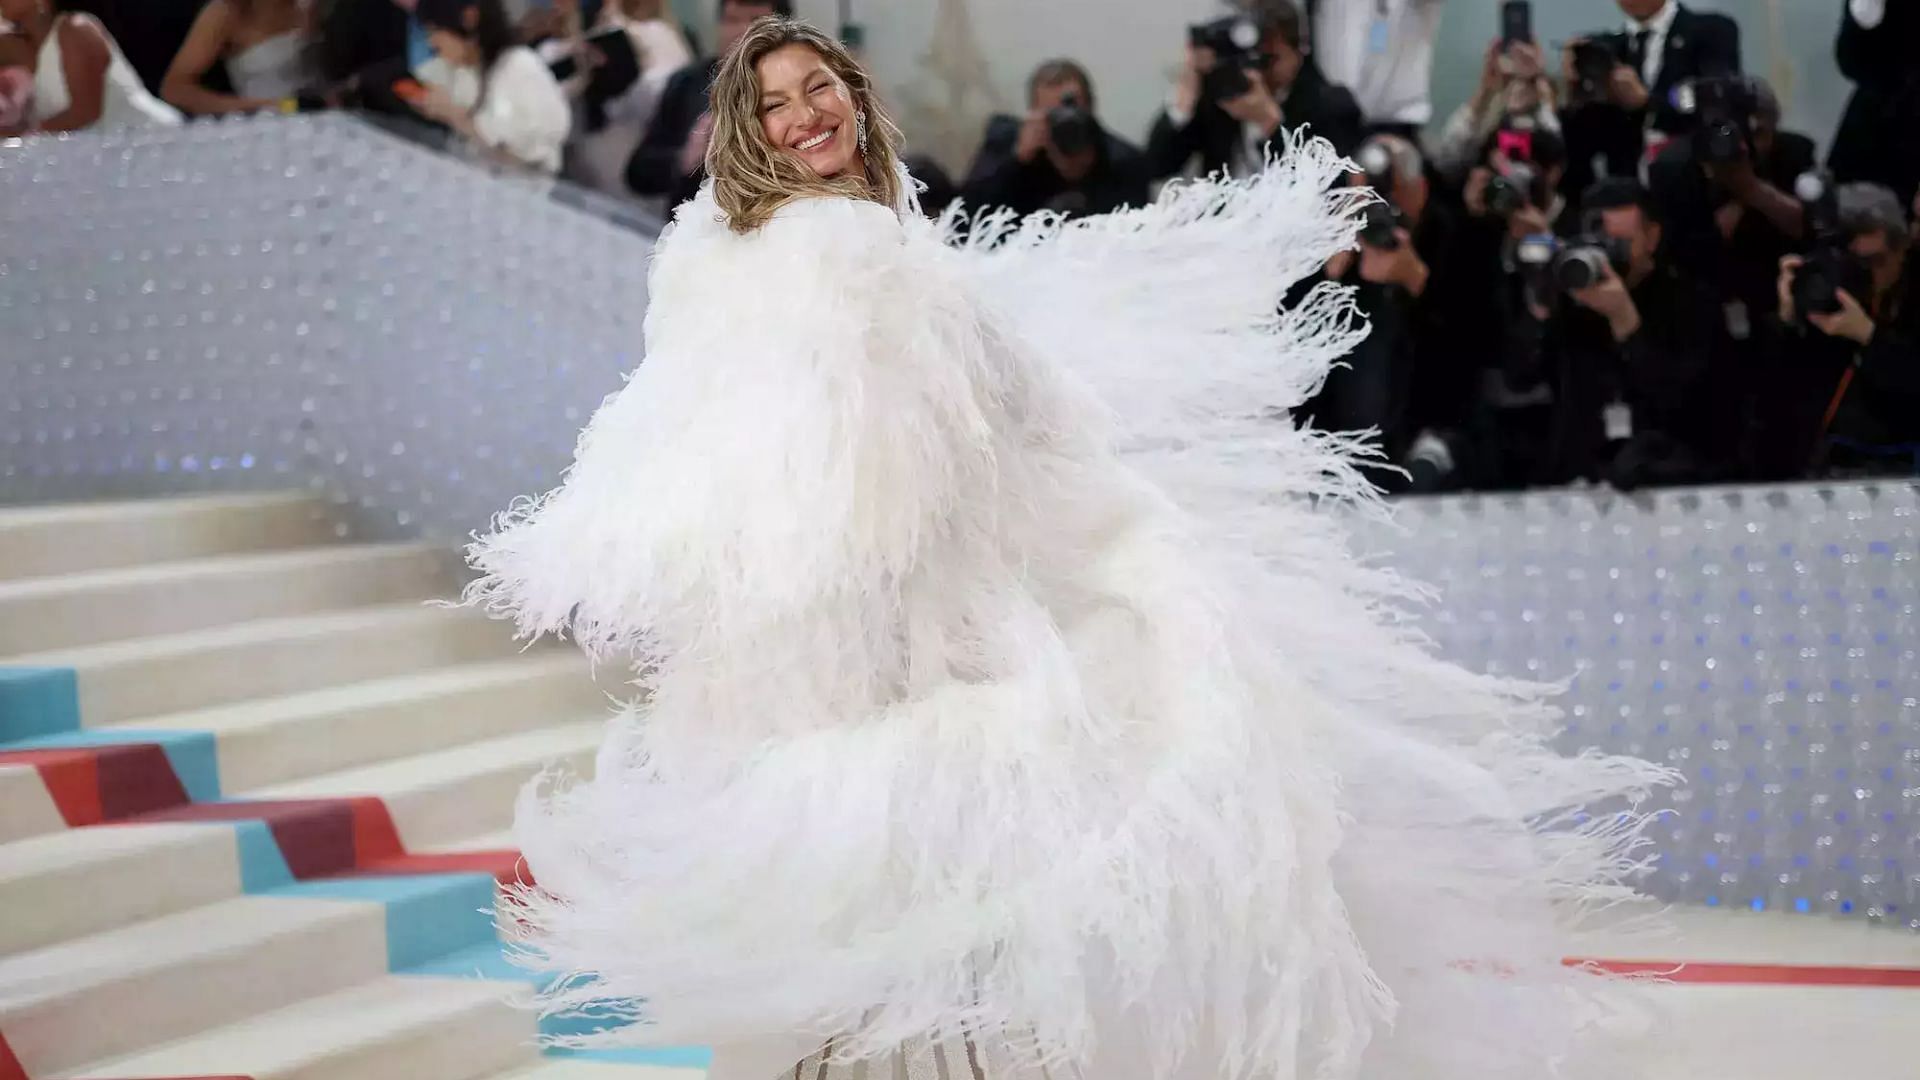 Gisele Bundchen dons stunning Chanel outfit in first Met Gala appearance post-Tom Brady breakup (Image Credit: Mike Coppola/Getty Images)